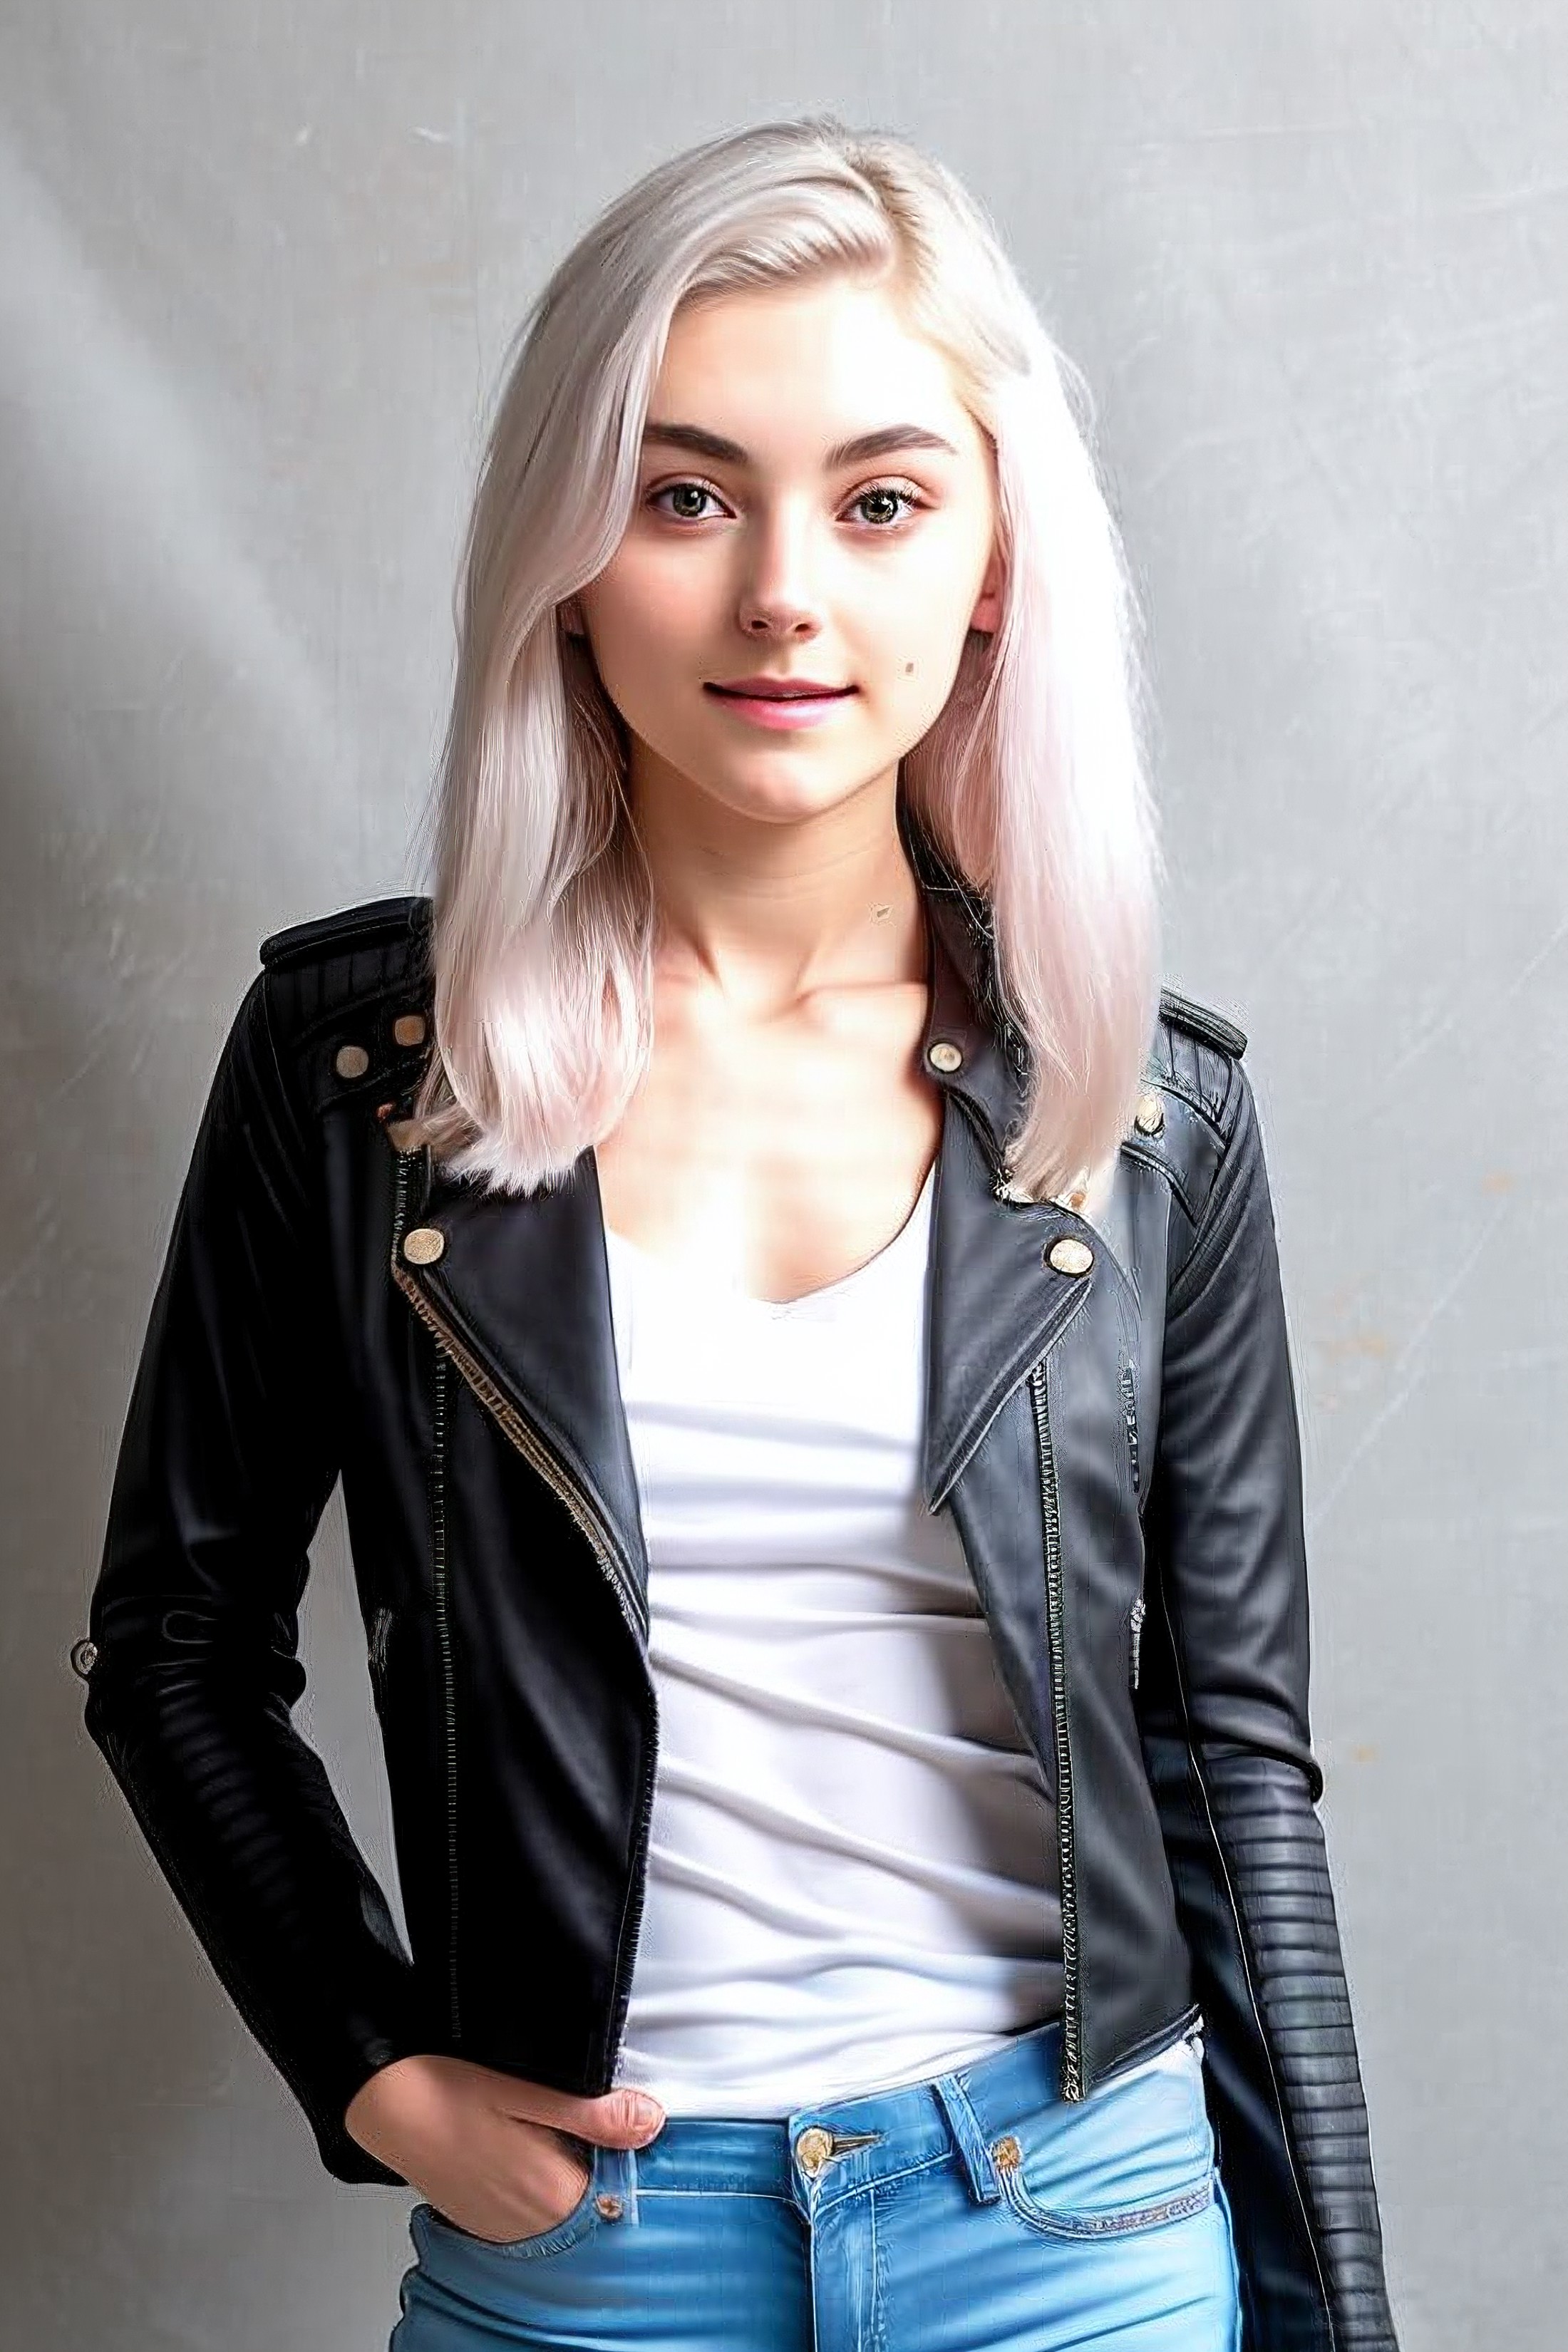 RAW photo, a photo of evaelfie00 wearing a white t-shirt, jeans and black leather jacket, wasteland background, (high deta...